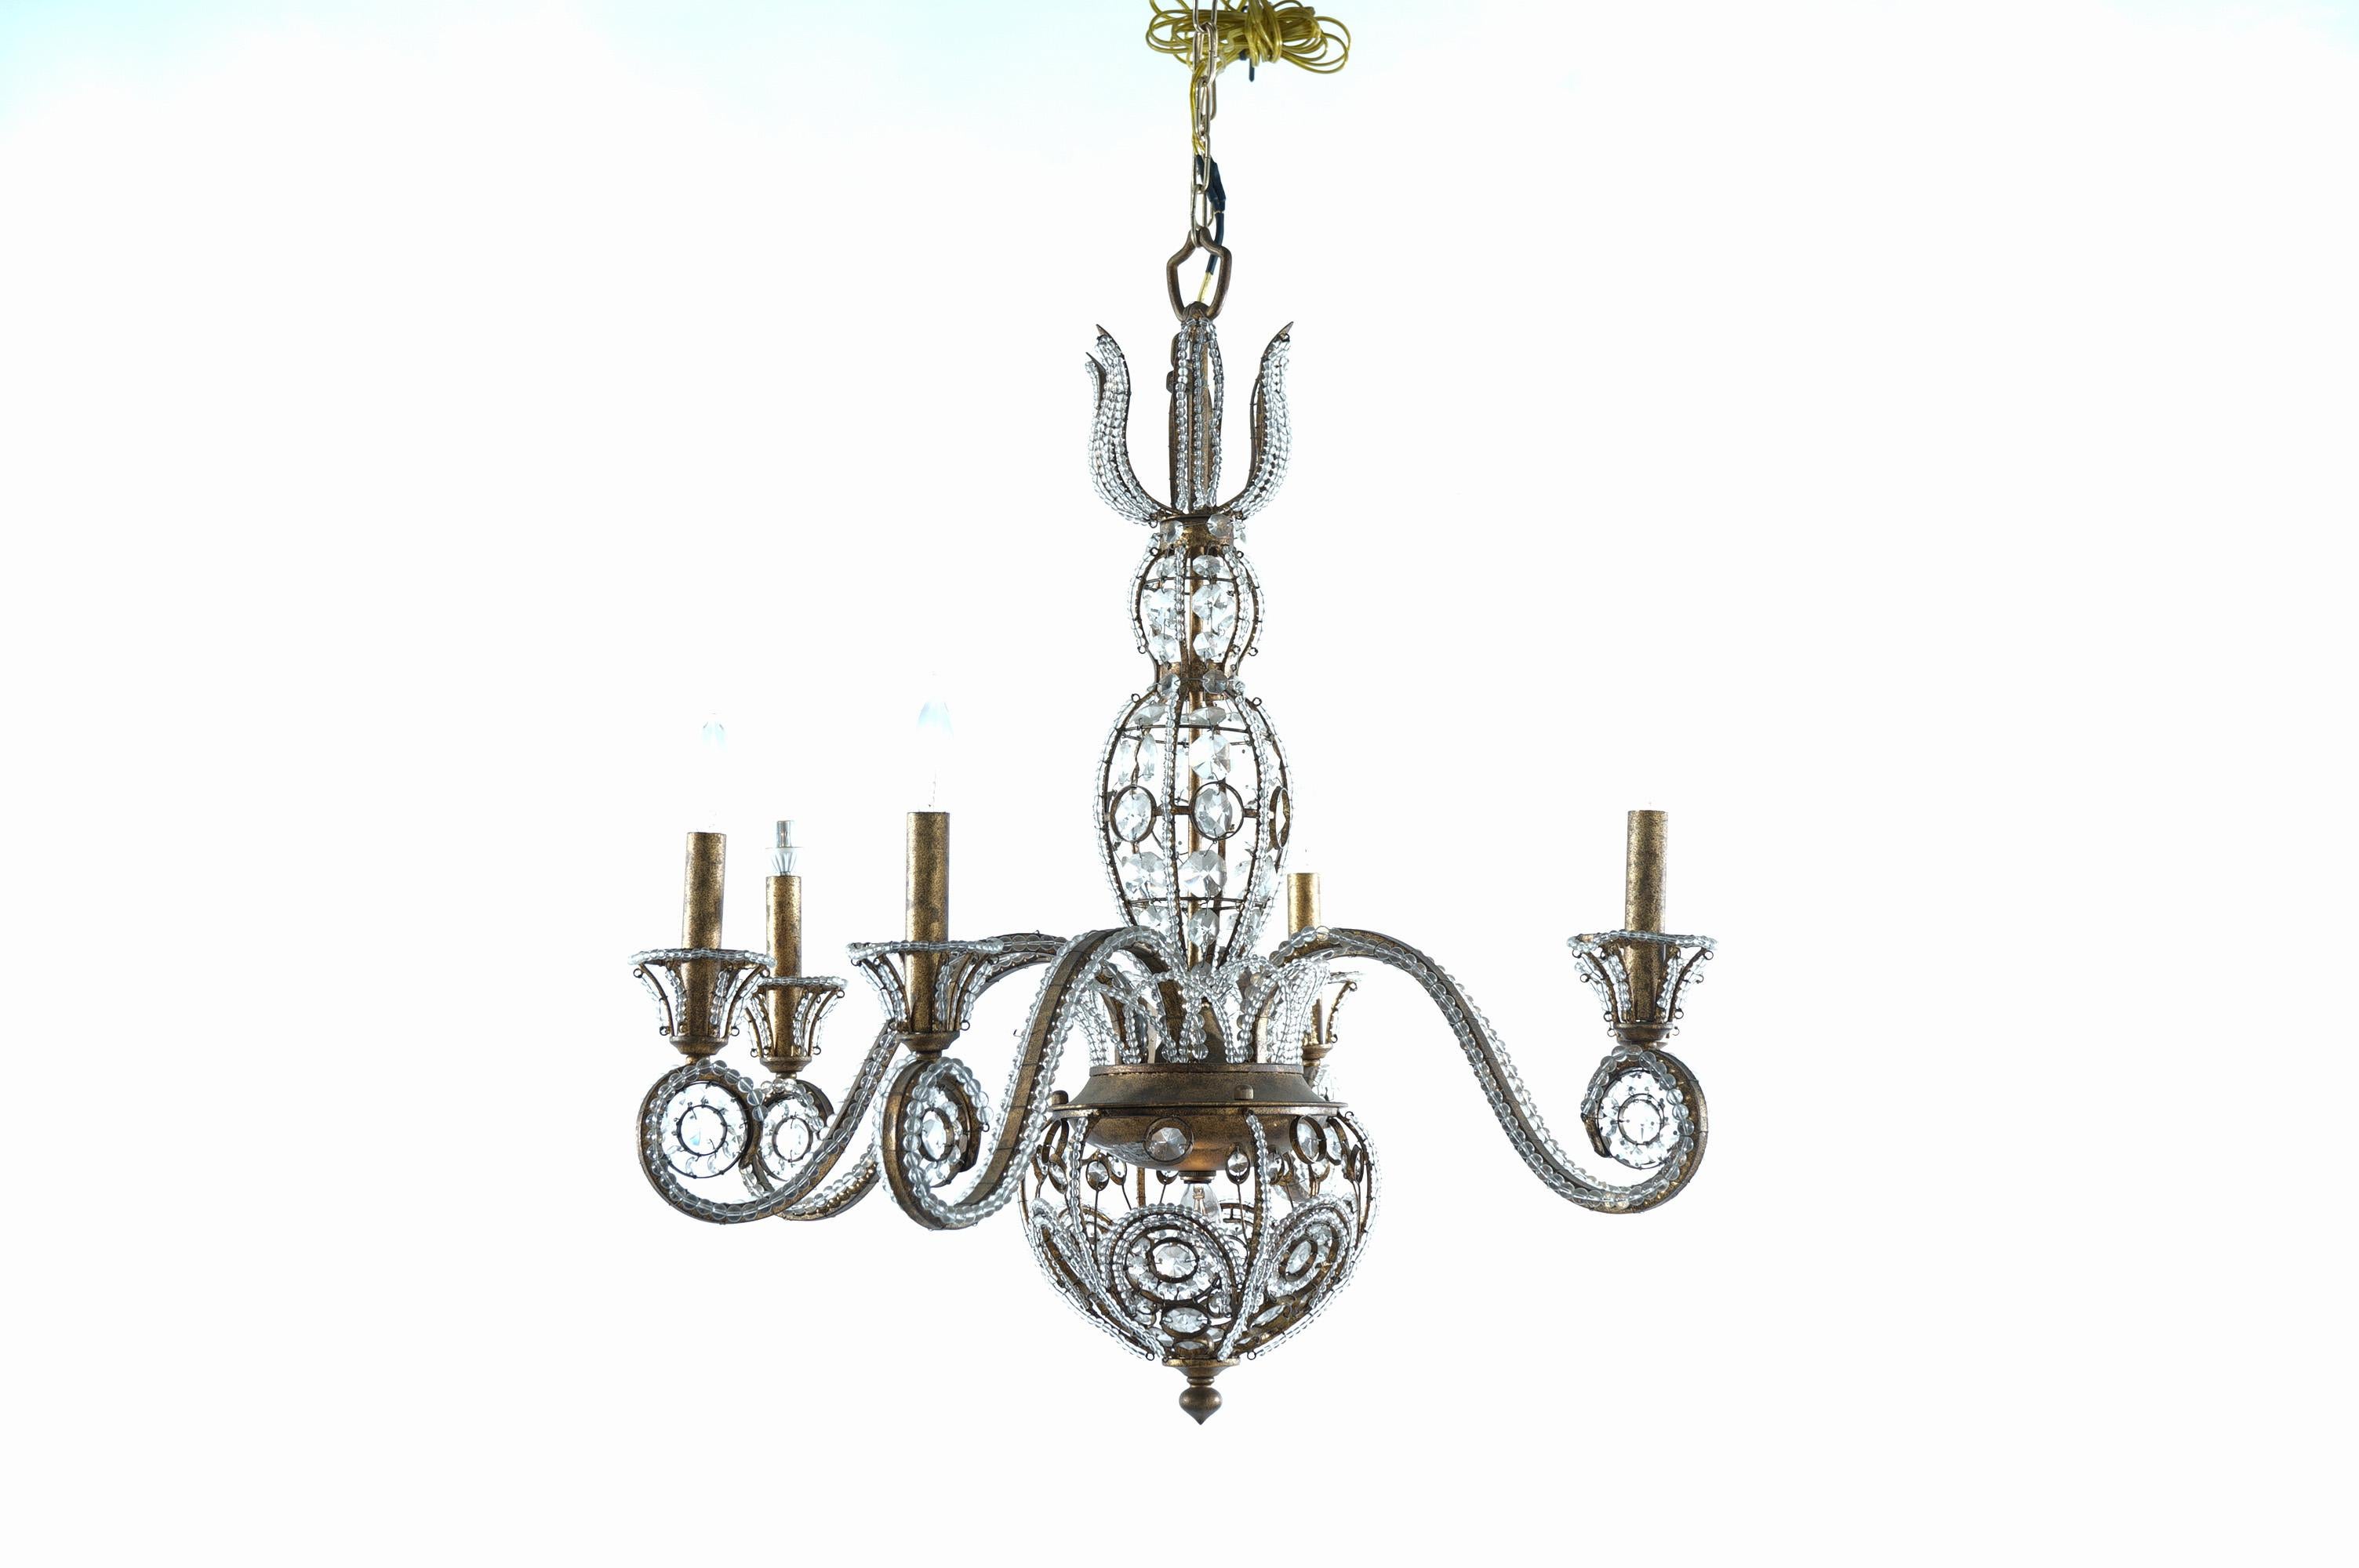 ***Ask About Reduced In-House Shipping Rates - Reliable Service & Fully Insured***An Italian Venetian style chandelier offers gilt  metal frame decorated with strung glass beads and having six scroll arms terminating in candle lights, crystal